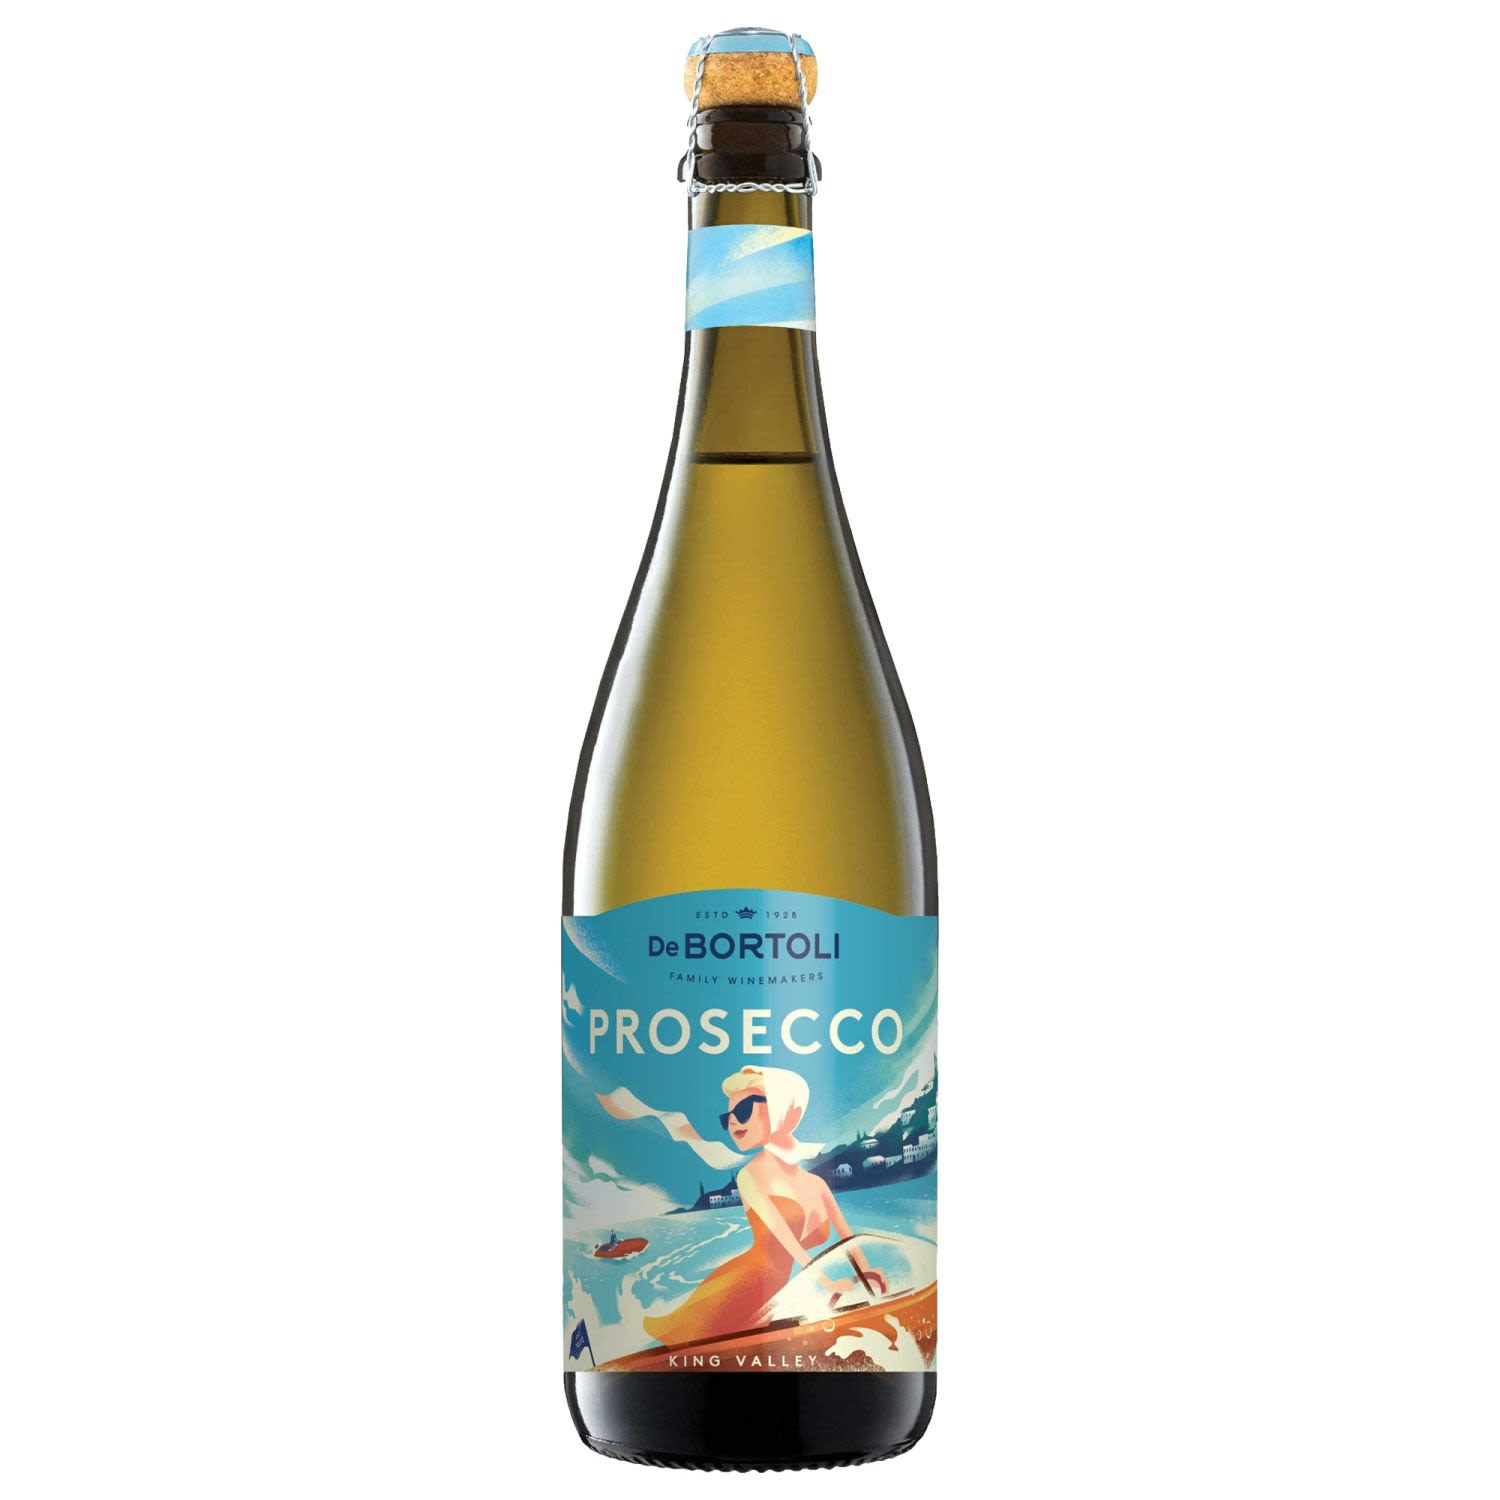 De Bortoli Prosecco is alive in the glass and full of beautifully creamy bubbles. The palate is long and fruit driven showing citrus, red apples and musk flavours that finishes light and crisp.<br /> <br />Alcohol Volume: 11.50%<br /><br />Pack Format: Bottle<br /><br />Standard Drinks: 6.8<br /><br />Pack Type: Bottle<br /><br />Country of Origin: Australia<br /><br />Region: King Valley<br /><br />Vintage: Non Vintage<br />